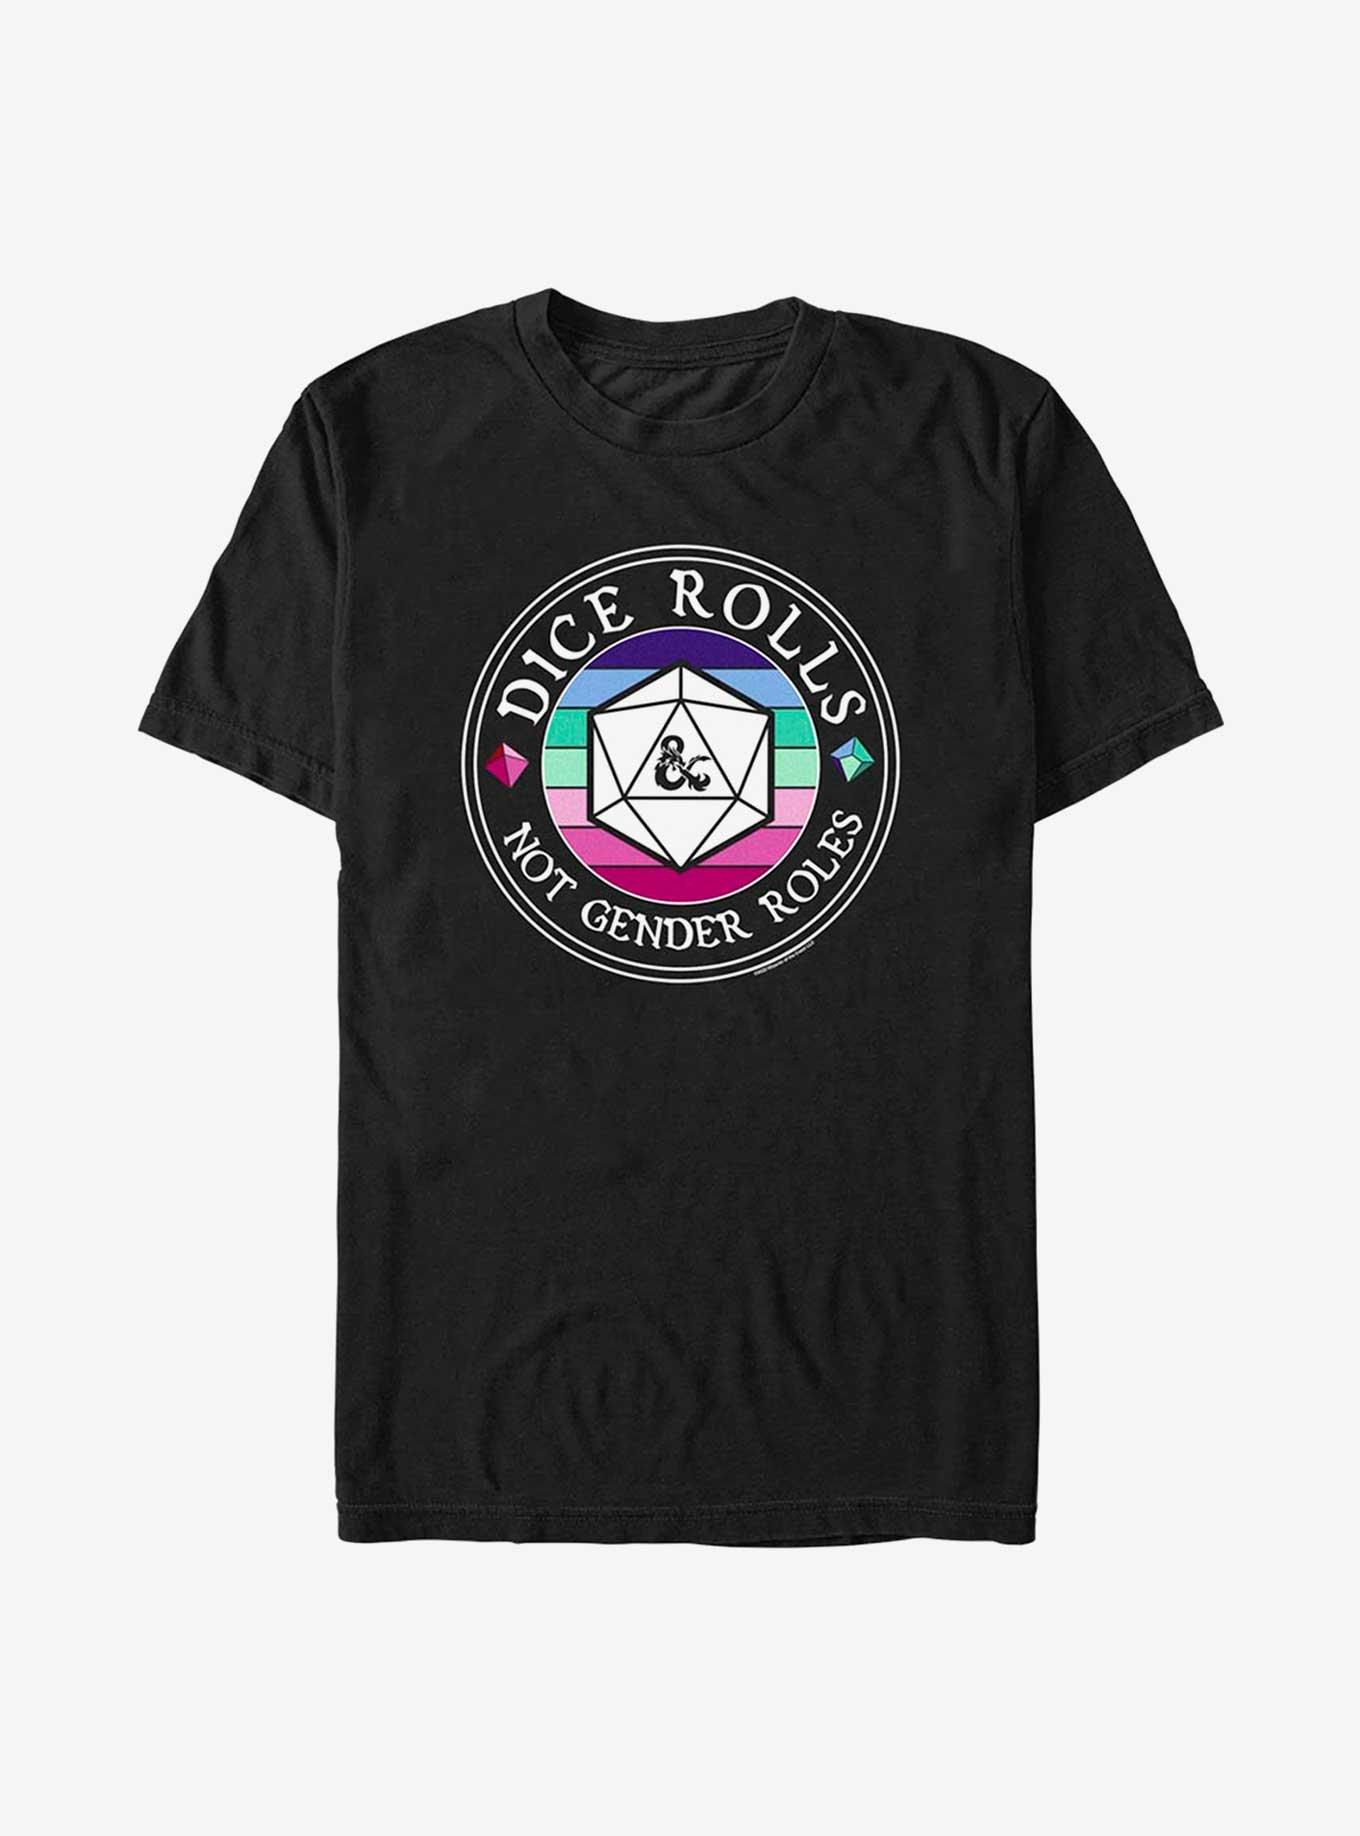 Dungeons & Dragons Dice Roles Pride T-Shirt